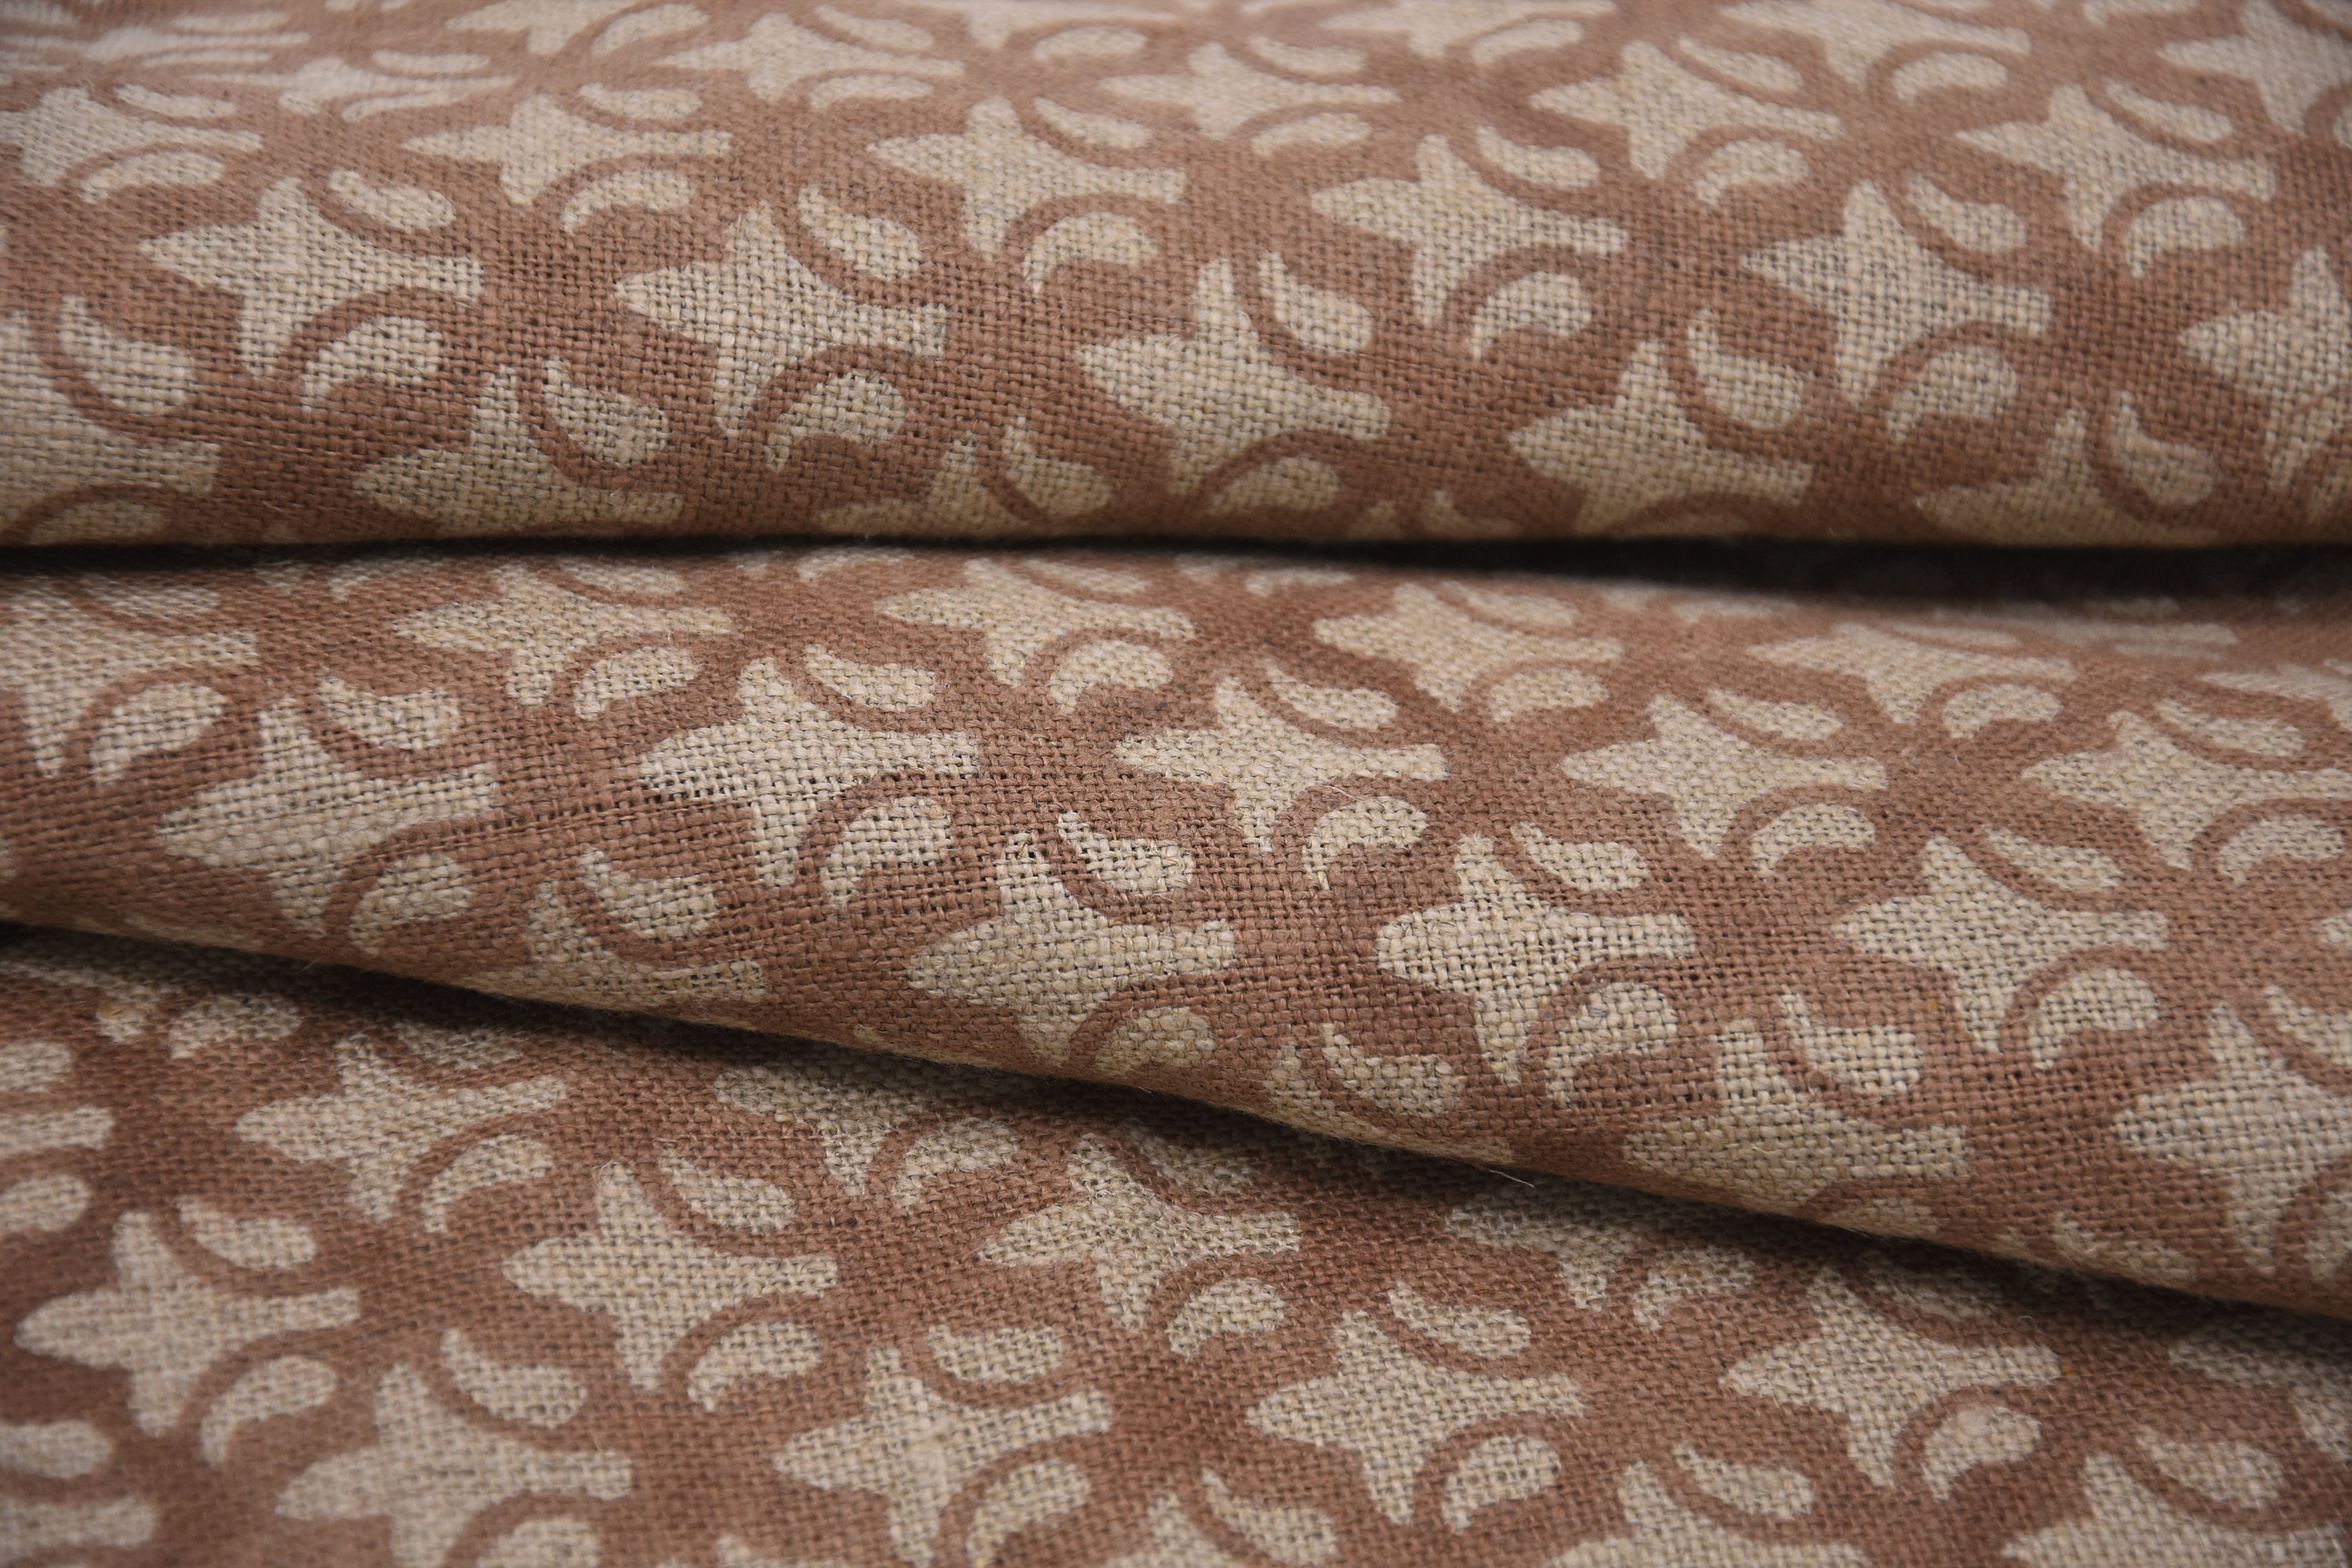 Block Print Thick Linen 58" Wide, Indian Fabric, Pillow Cover, Rust Floral Printed Fabric, Table Cloth - RAJPUTANA JAAL